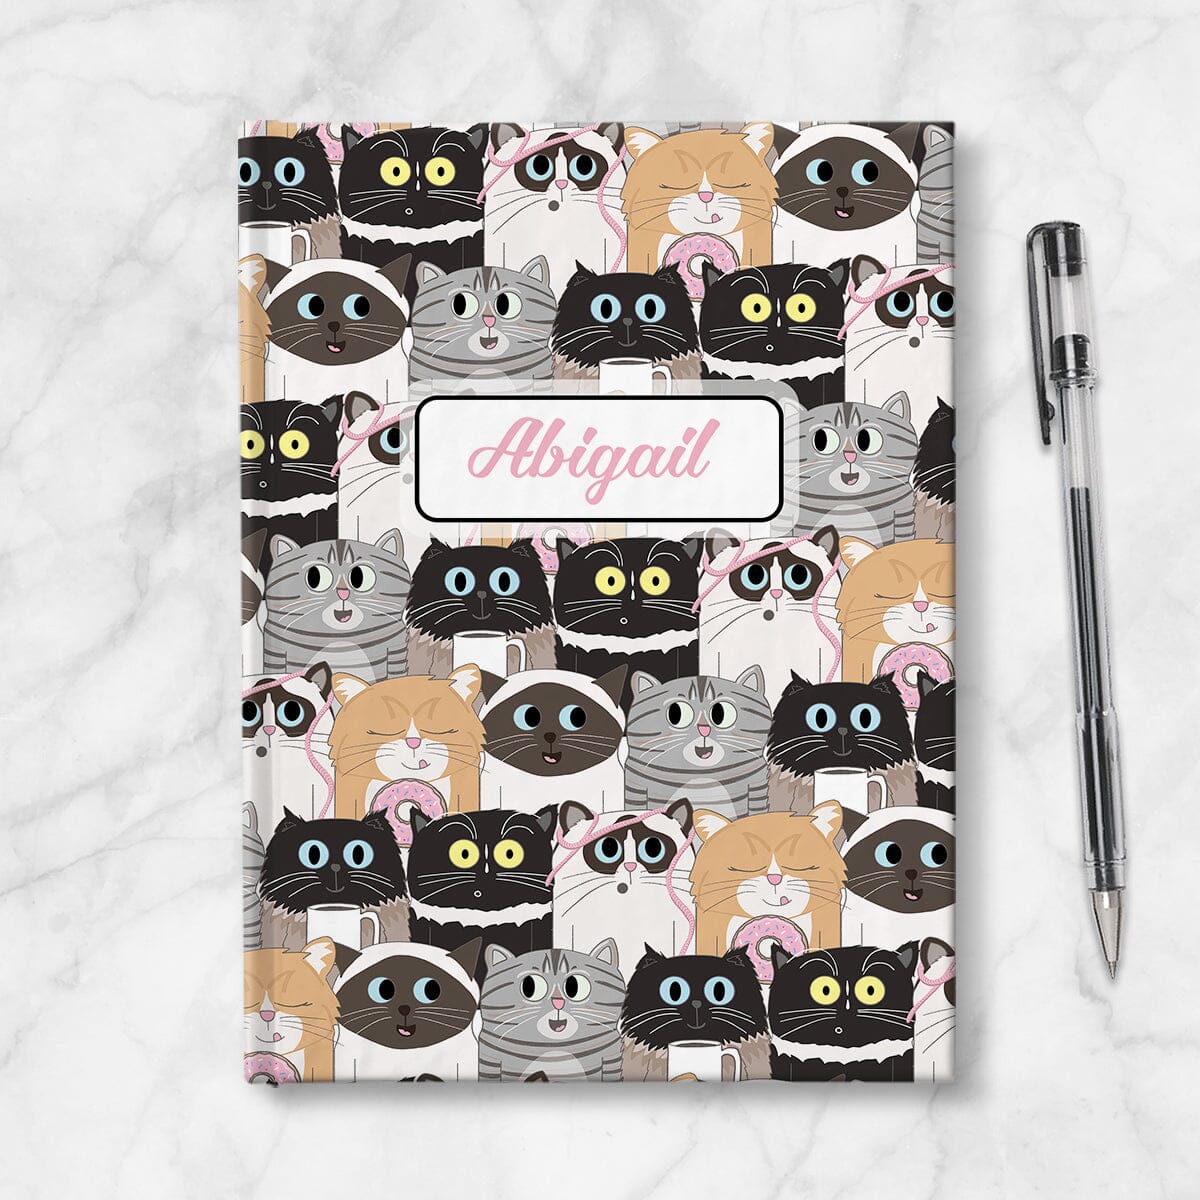 Personalized Cute Cat Stack Pattern Journal at Artistically Invited. Front side of journal shown on table next to a pen.